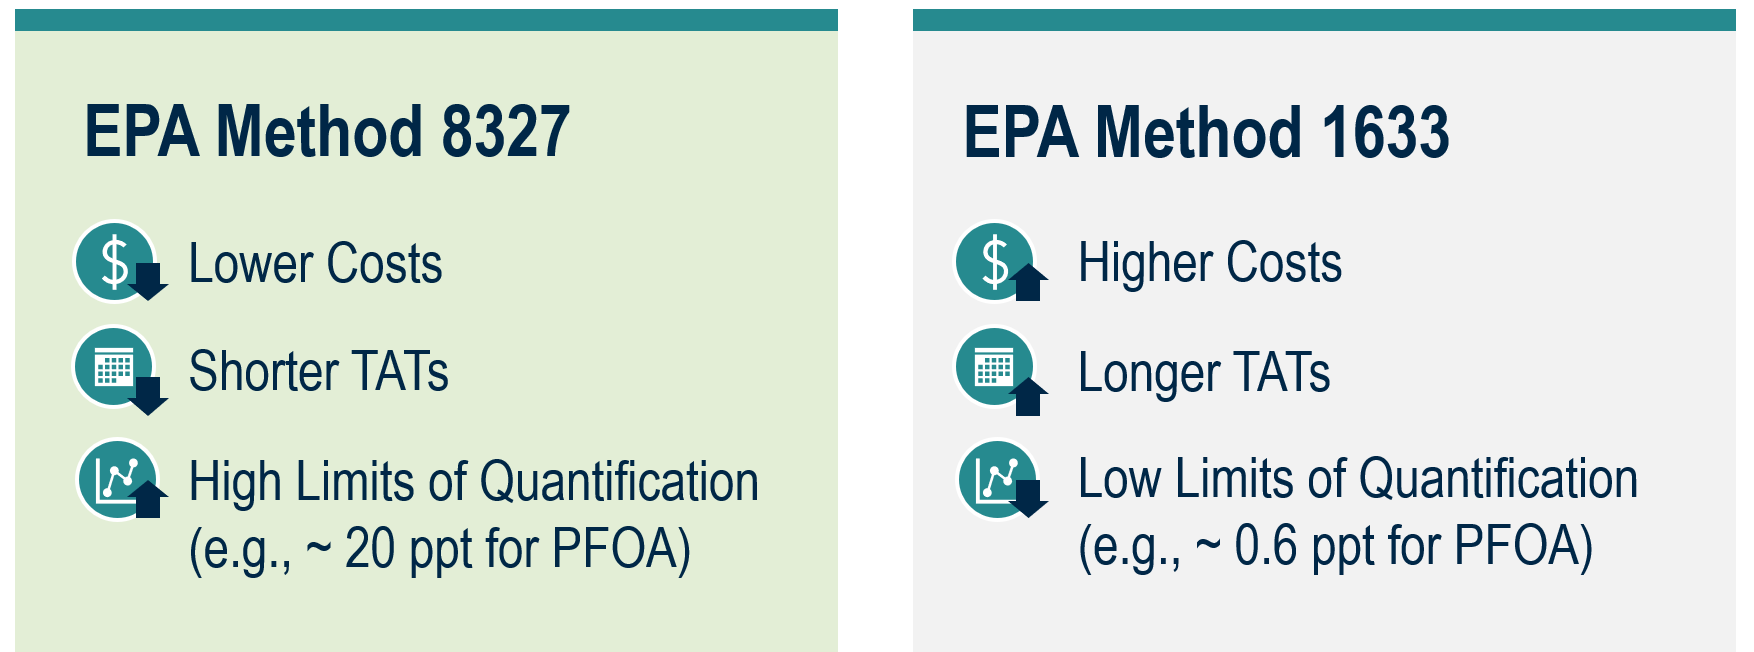 Infographic comparing EPA Methods 8327 and 1633 in terms of costs, turn around times, and limits of quantification.